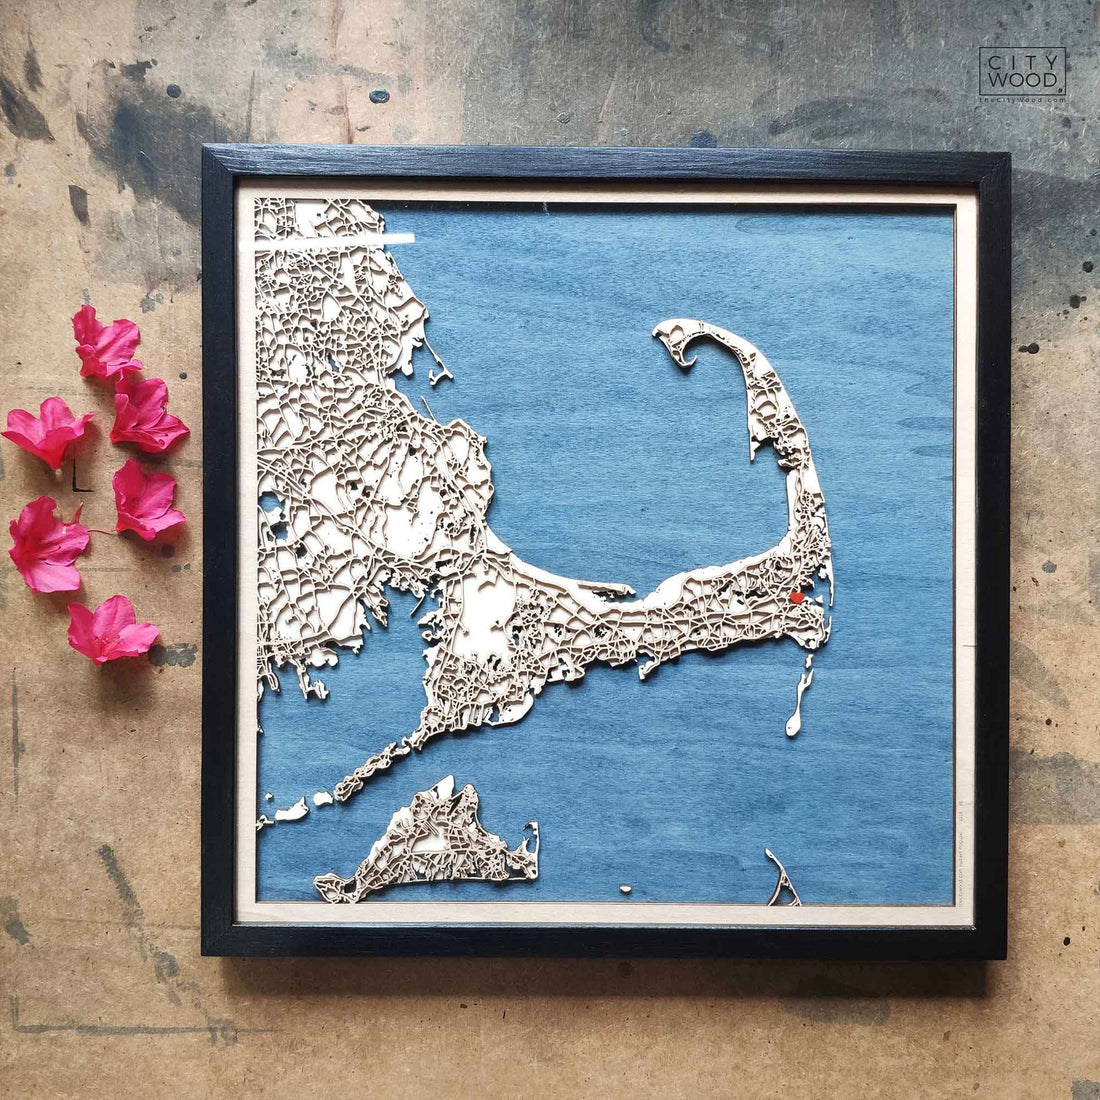 5th Anniversary Gift Ideas: Customized Laser-Cut and Engraved Wooden Maps